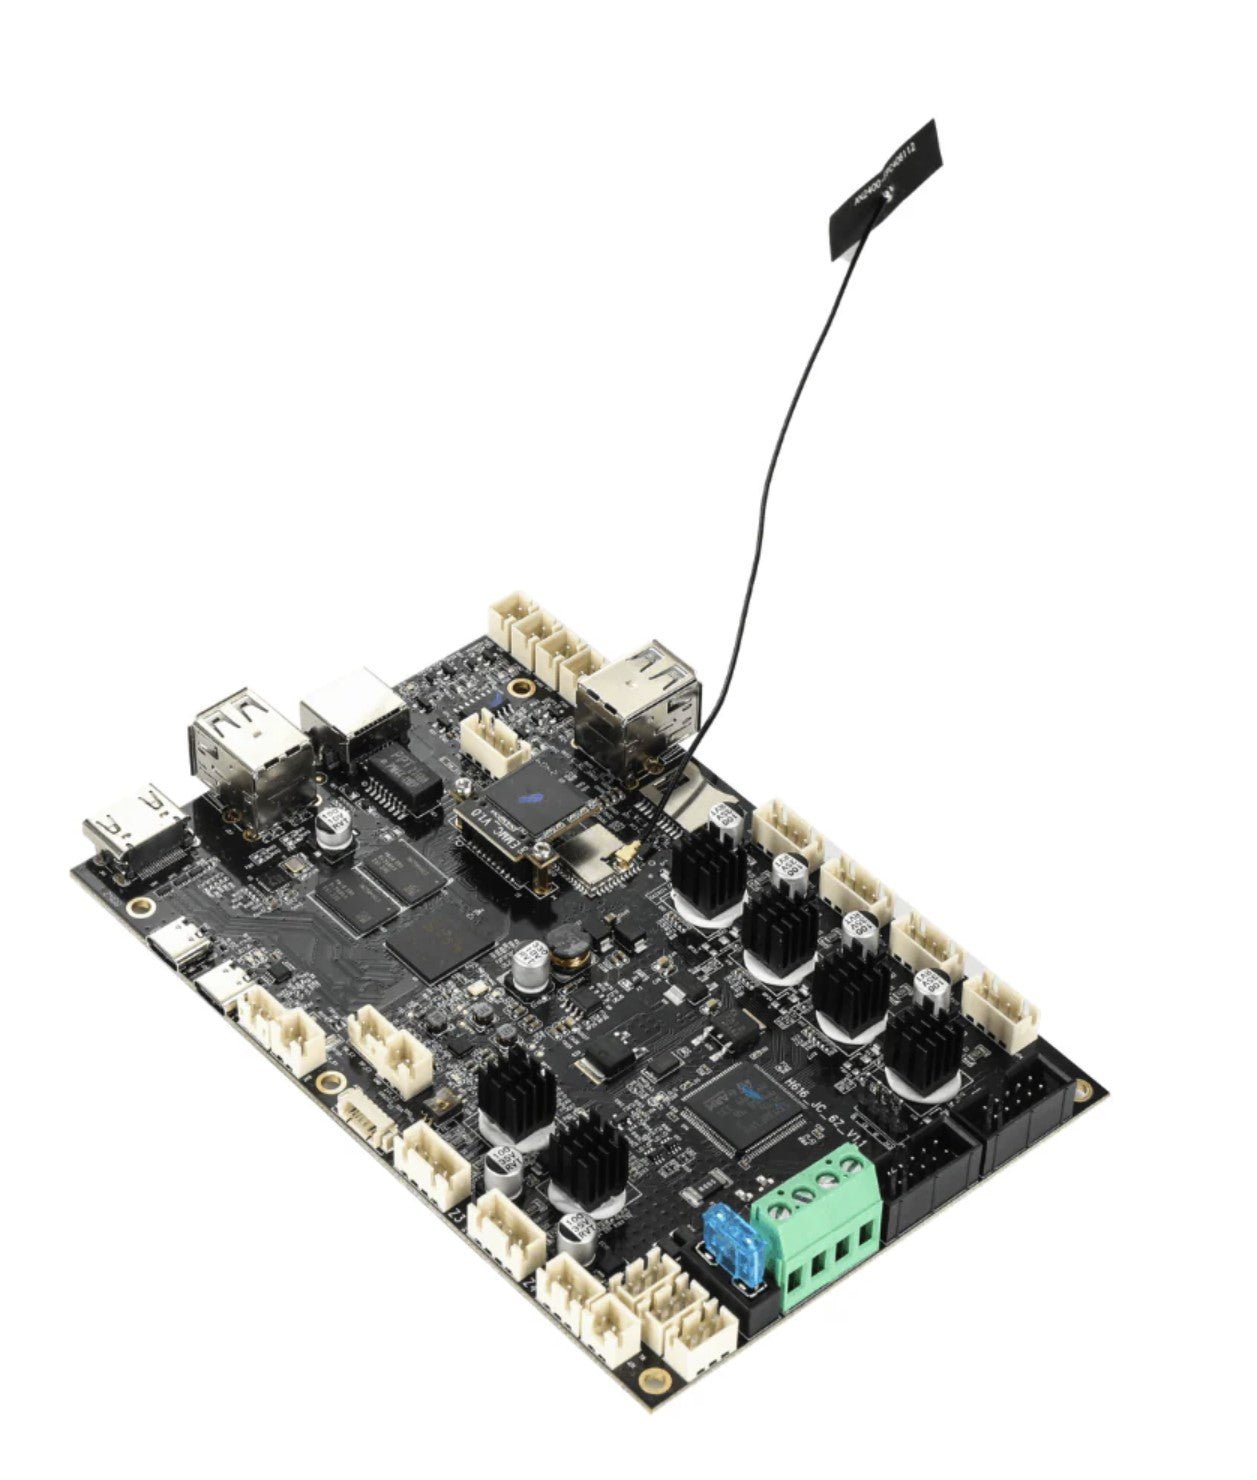 Sovol SV08 Silent 64 - bit Mainboard with Advanced TMC2209 Drivers - West3D 3D Printing Supplies - SOVOL